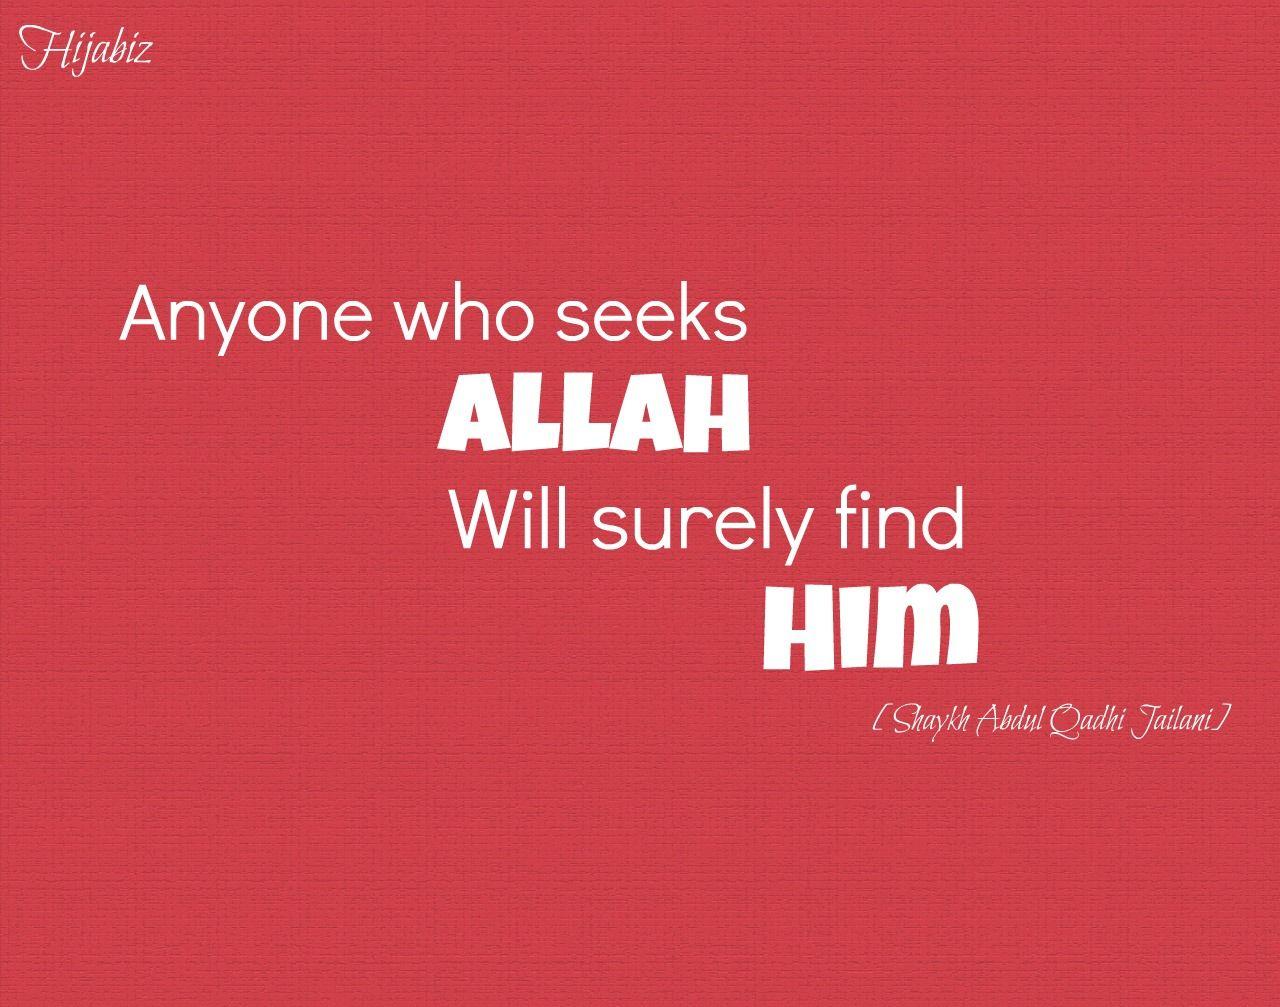 Wallpapers Islamic Quotes - Wallpaper Cave